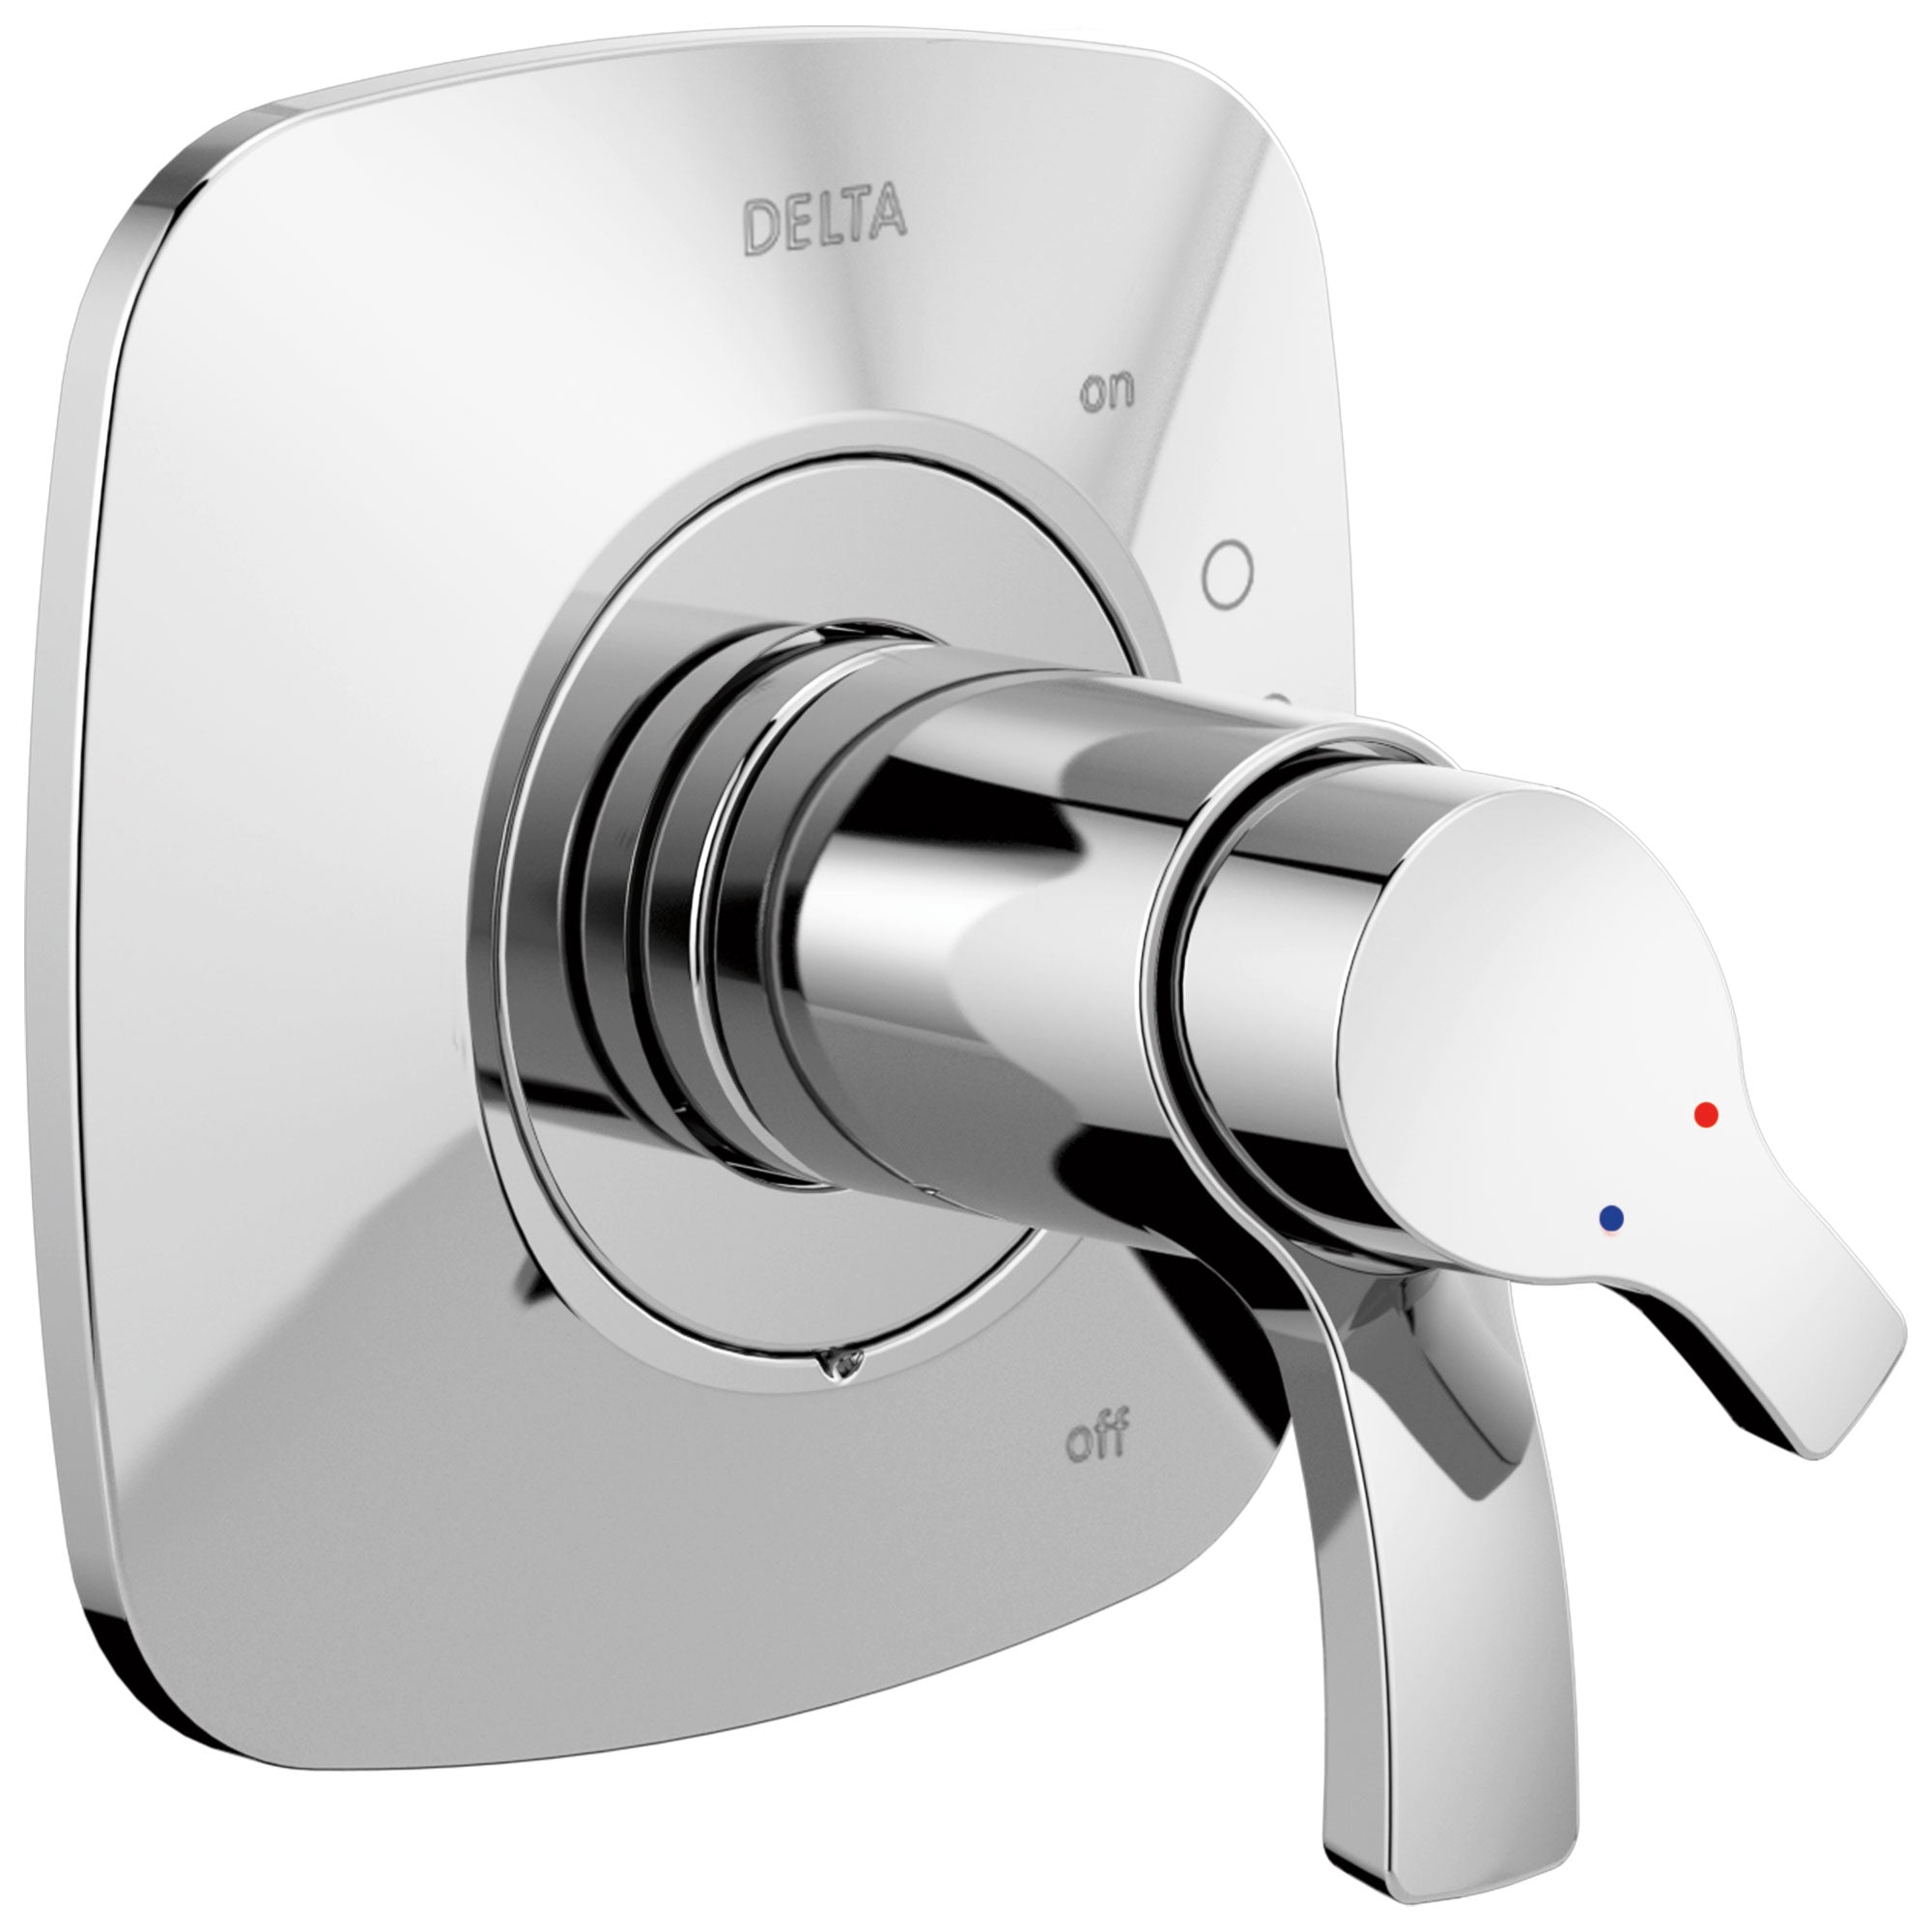 Delta Tesla Collection Chrome Modern TempAssure 17T Dual Thermostatic and Pressure Shower Faucet Control Handle Includes Rough-in Valve with Stops D1953V